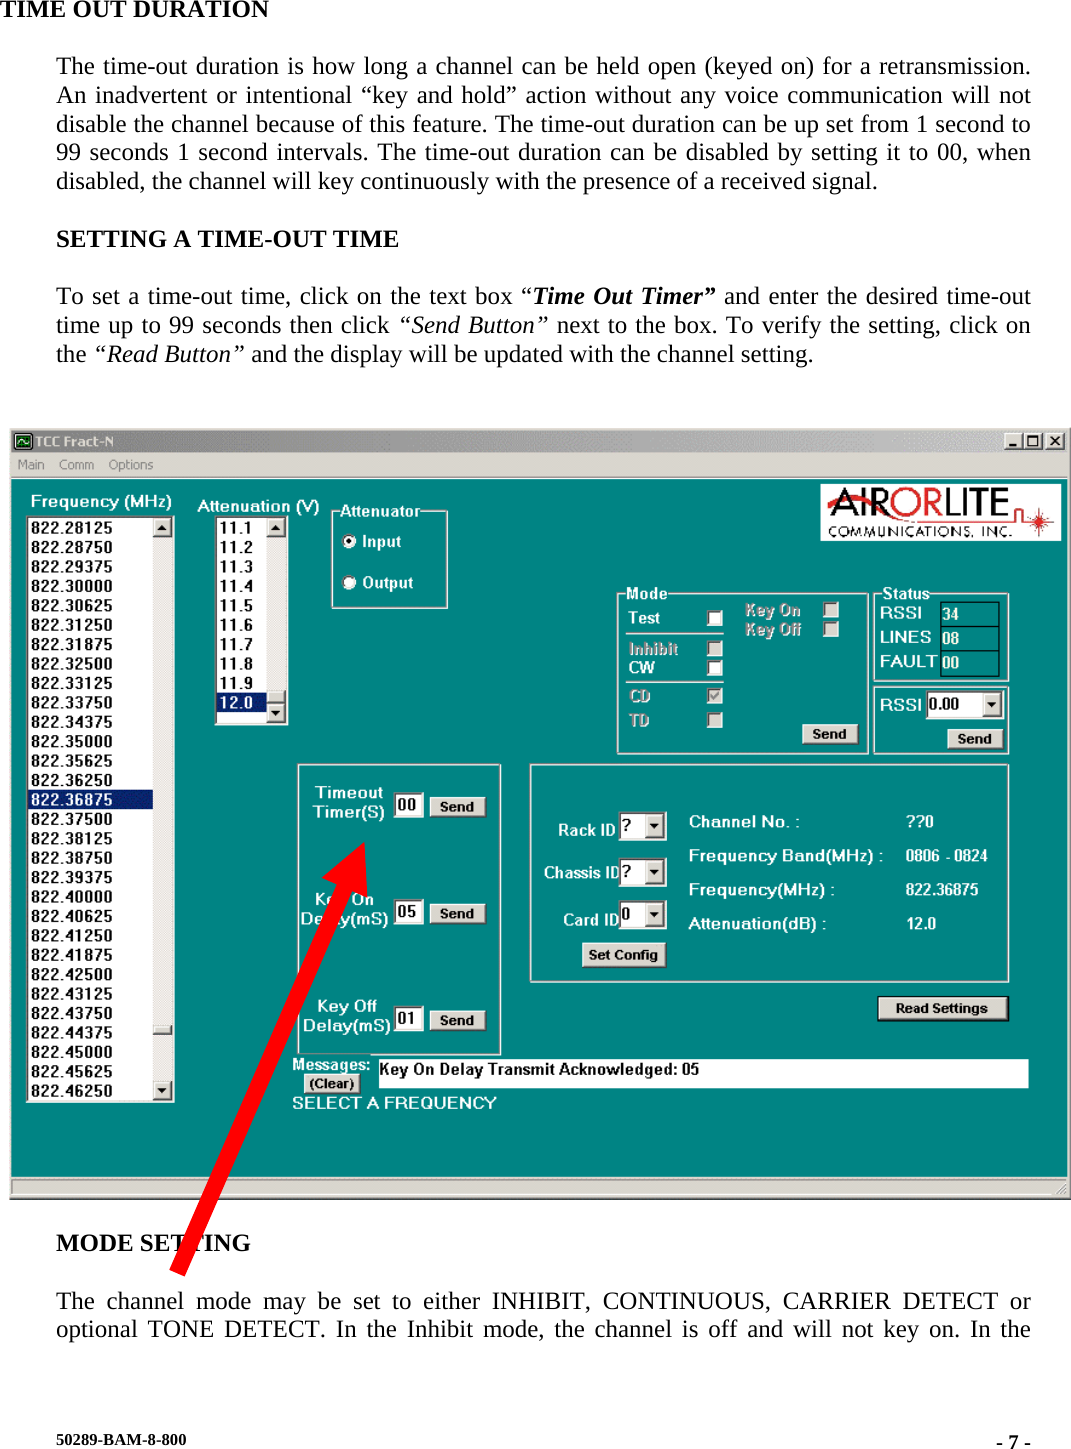 TIME OUT DURATION  The time-out duration is how long a channel can be held open (keyed on) for a retransmission. An inadvertent or intentional “key and hold” action without any voice communication will not disable the channel because of this feature. The time-out duration can be up set from 1 second to 99 seconds 1 second intervals. The time-out duration can be disabled by setting it to 00, when disabled, the channel will key continuously with the presence of a received signal.  SETTING A TIME-OUT TIME  To set a time-out time, click on the text box “Time Out Timer” and enter the desired time-out time up to 99 seconds then click “Send Button” next to the box. To verify the setting, click on the “Read Button” and the display will be updated with the channel setting.     MODE SETTING  The channel mode may be set to either INHIBIT, CONTINUOUS, CARRIER DETECT or optional TONE DETECT. In the Inhibit mode, the channel is off and will not key on. In the 50289-BAM-8-800  - 7 -